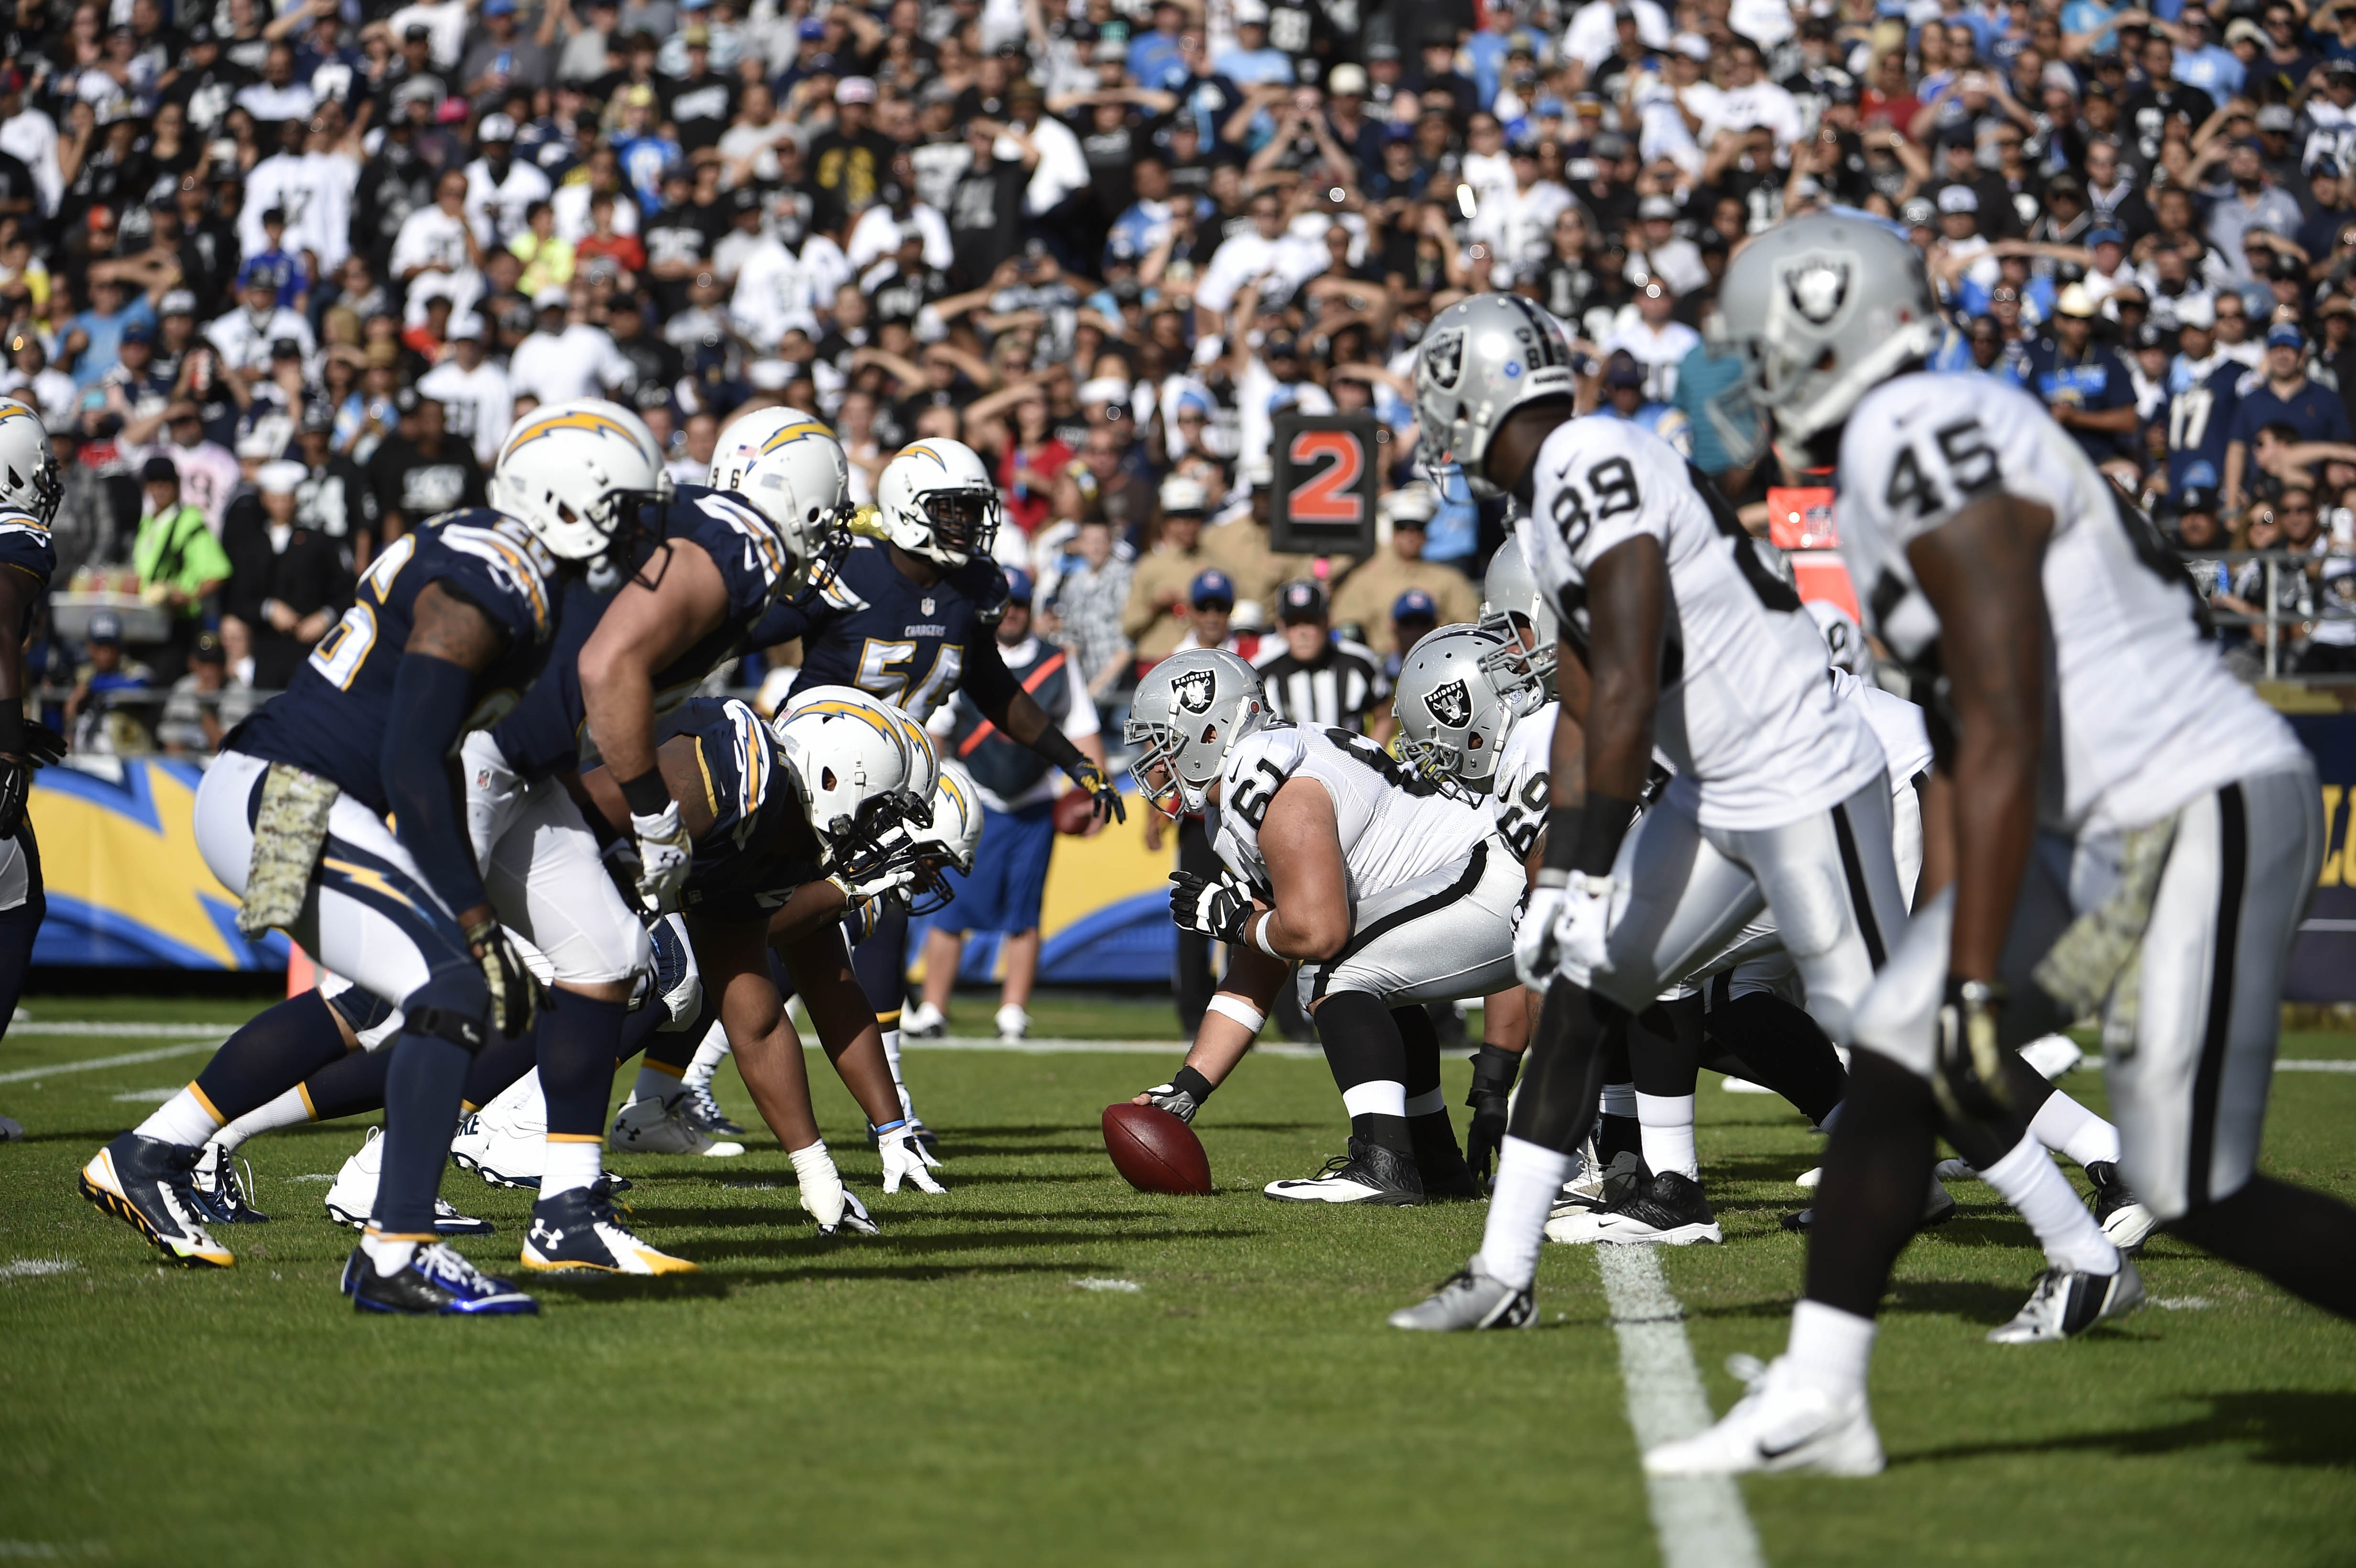 NFL rivals Oakland Raiders and San Diego Chargers plan possible shared